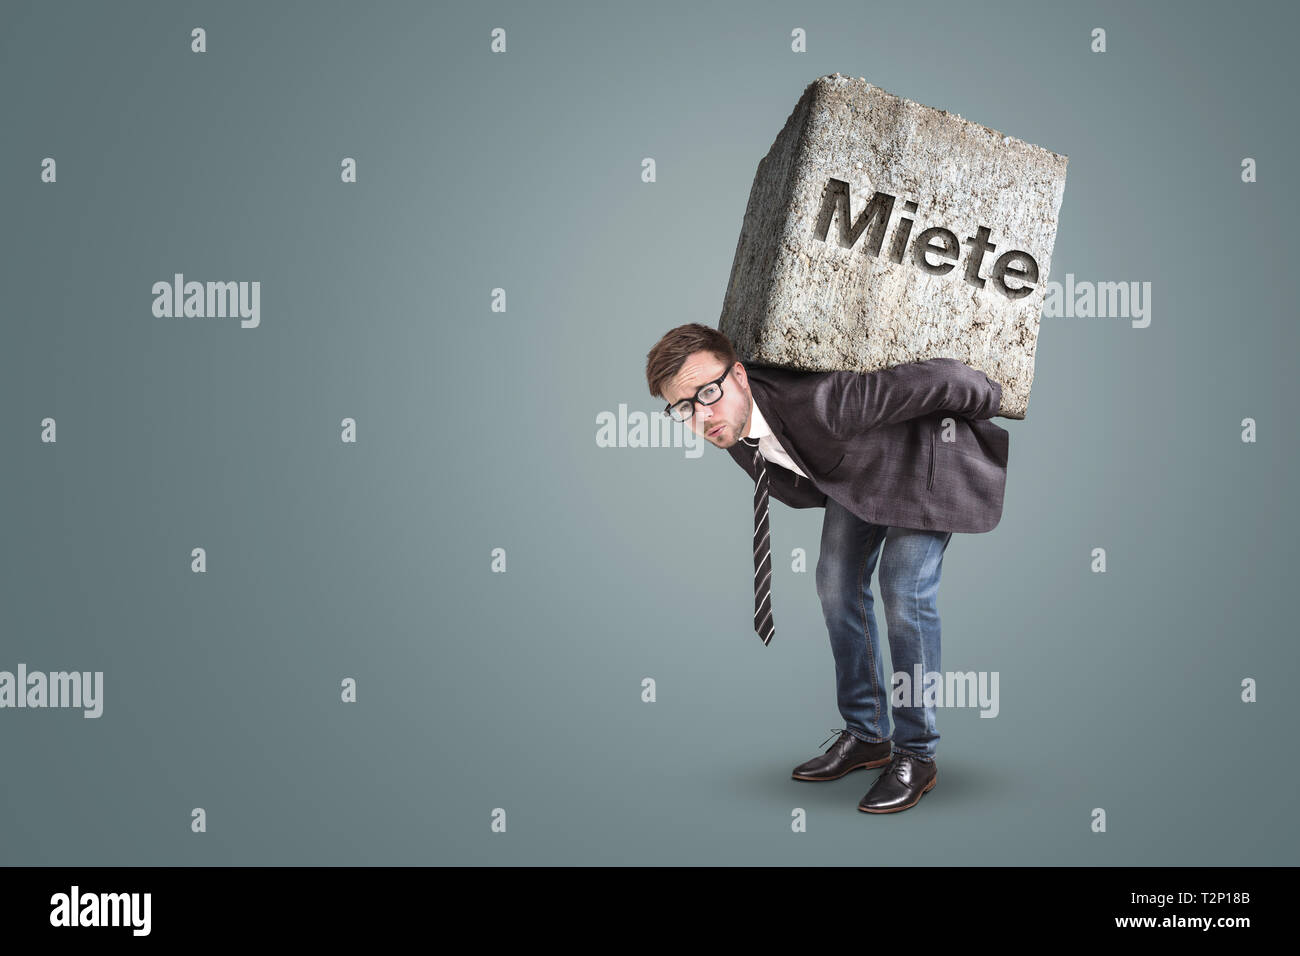 Conceptual image of a man carrying a heavy stone with the German word “Miete” written on it. Stock Photo